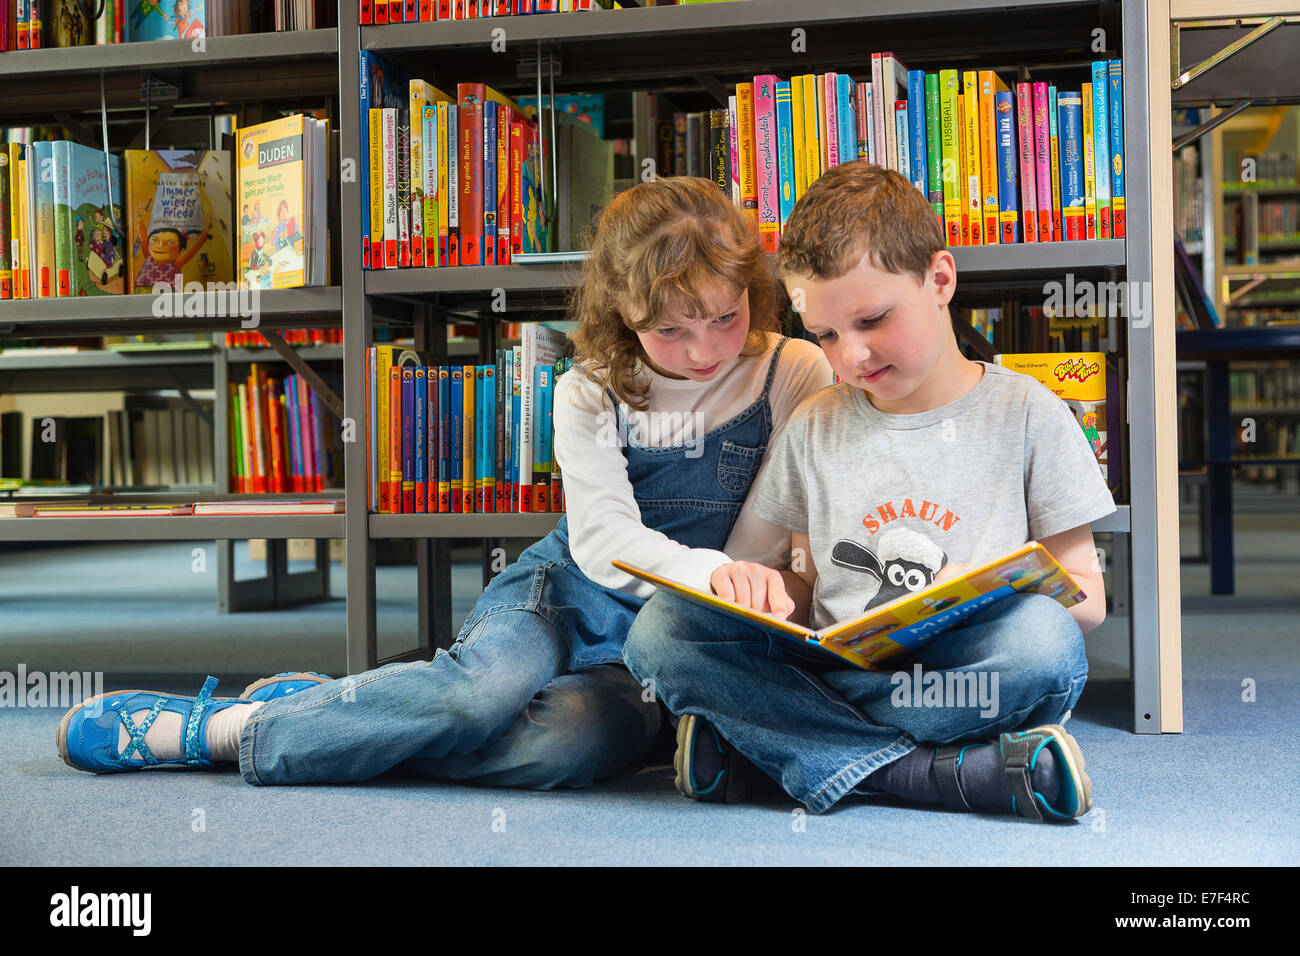 Two children reading reading a book in a public library, Coswig, Saxony, Germany Stock Photo